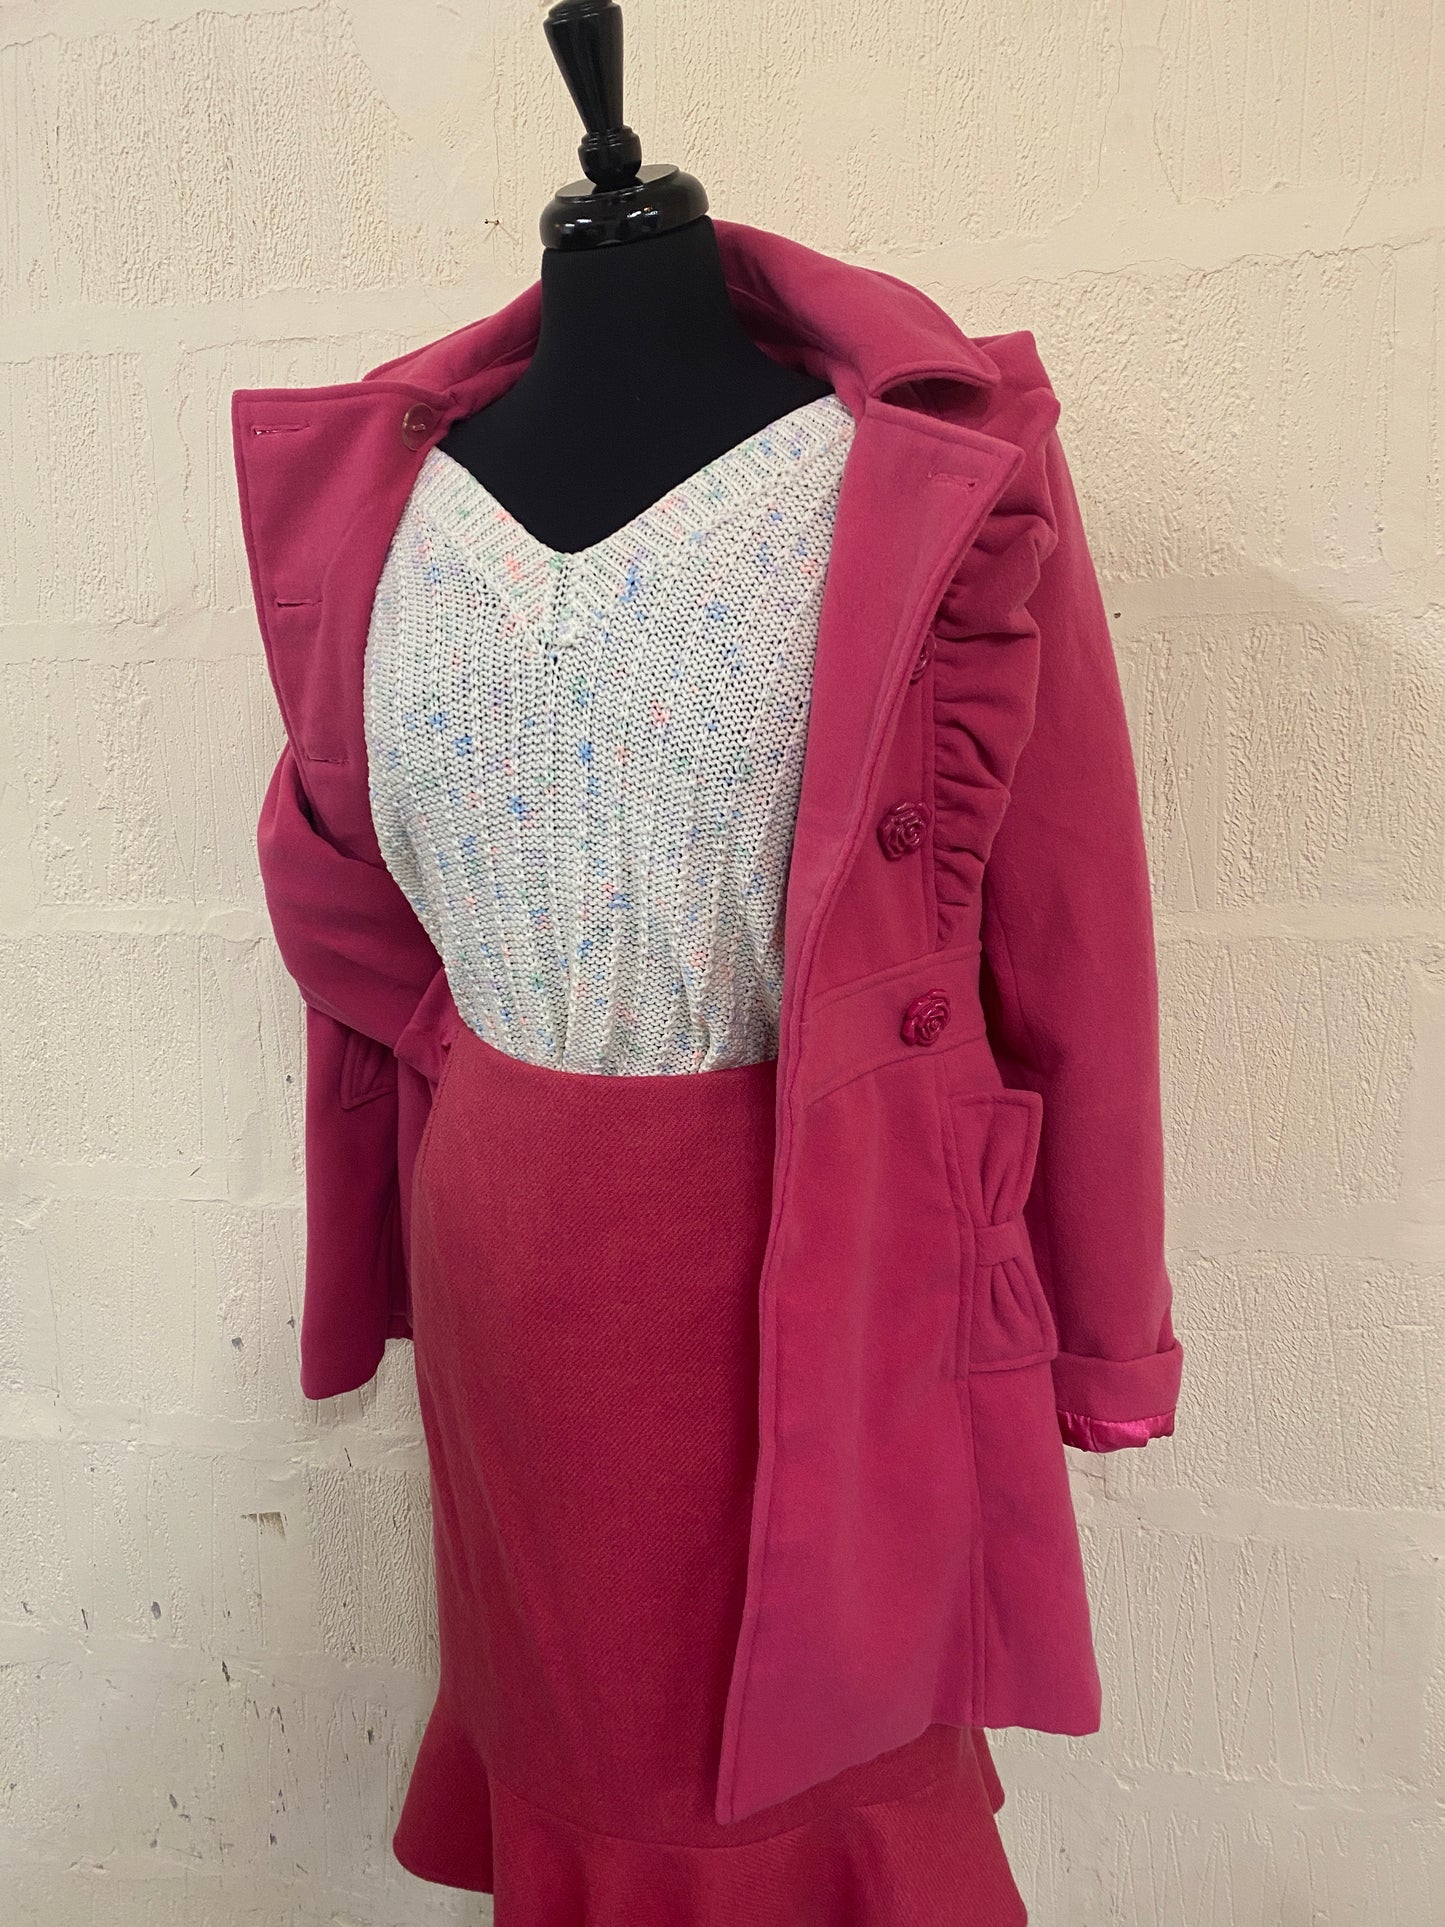 Hot Pink Frill Detail Coat Size S